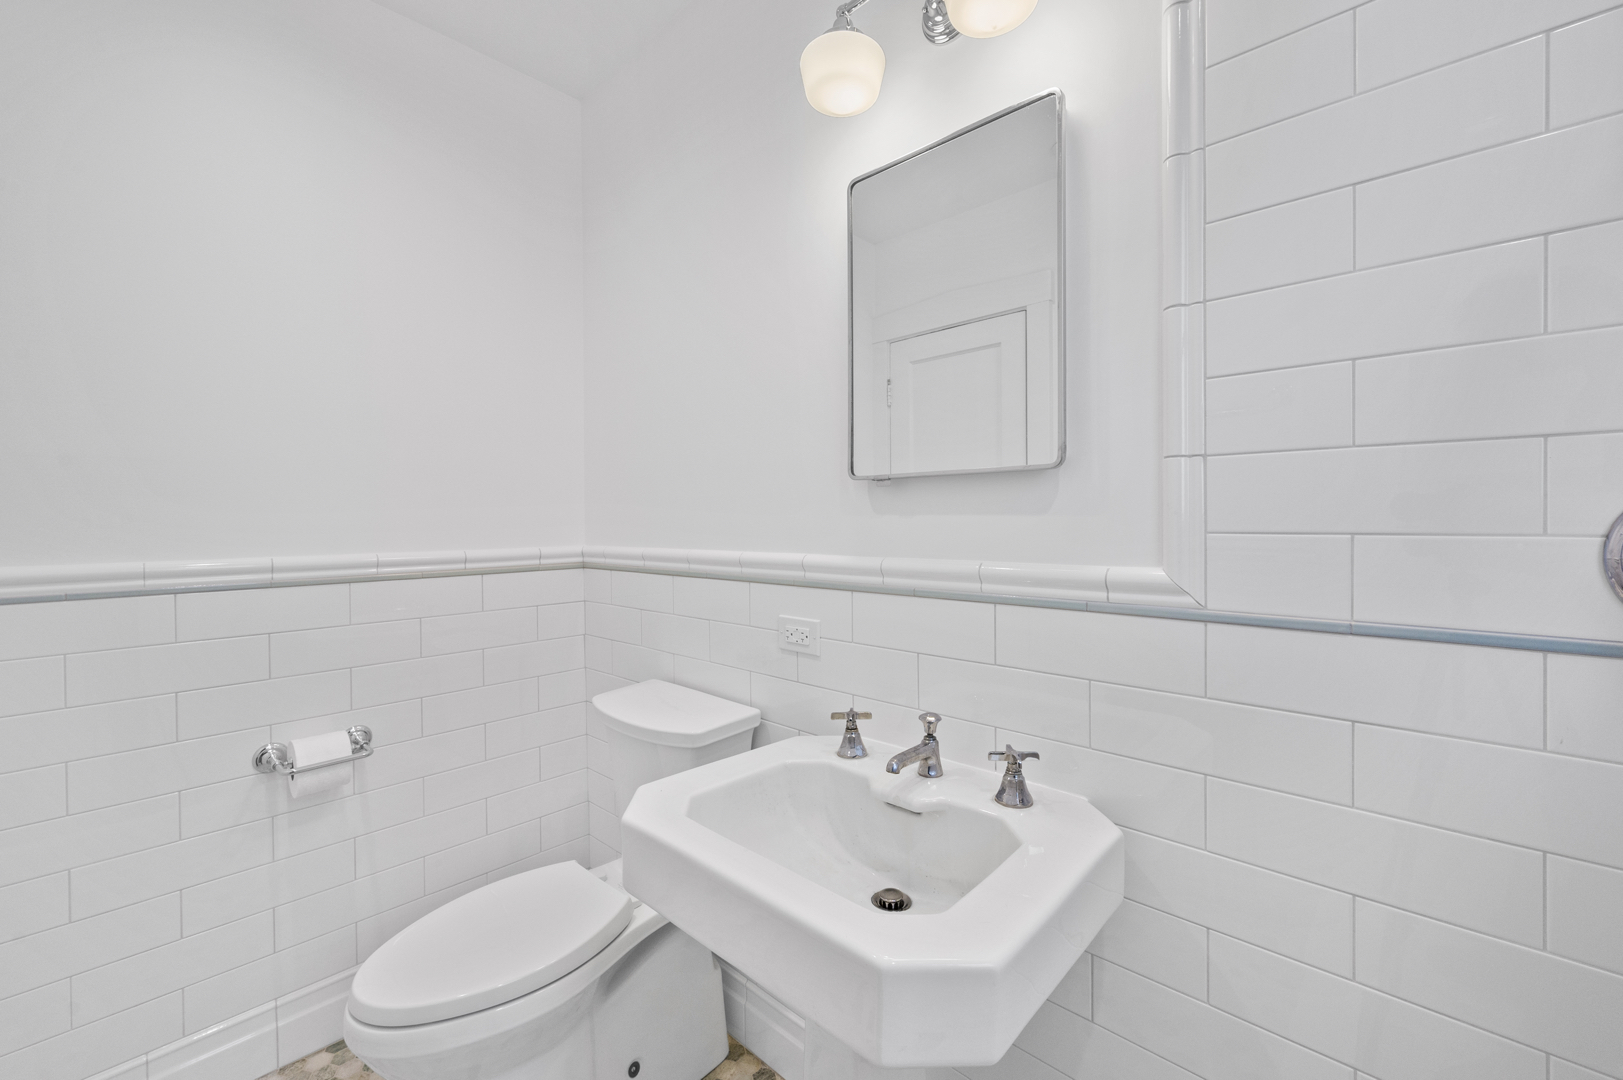 An all-white bathroom with subway tile walls, a white toilet, and sink with a mirror and vanity lights.